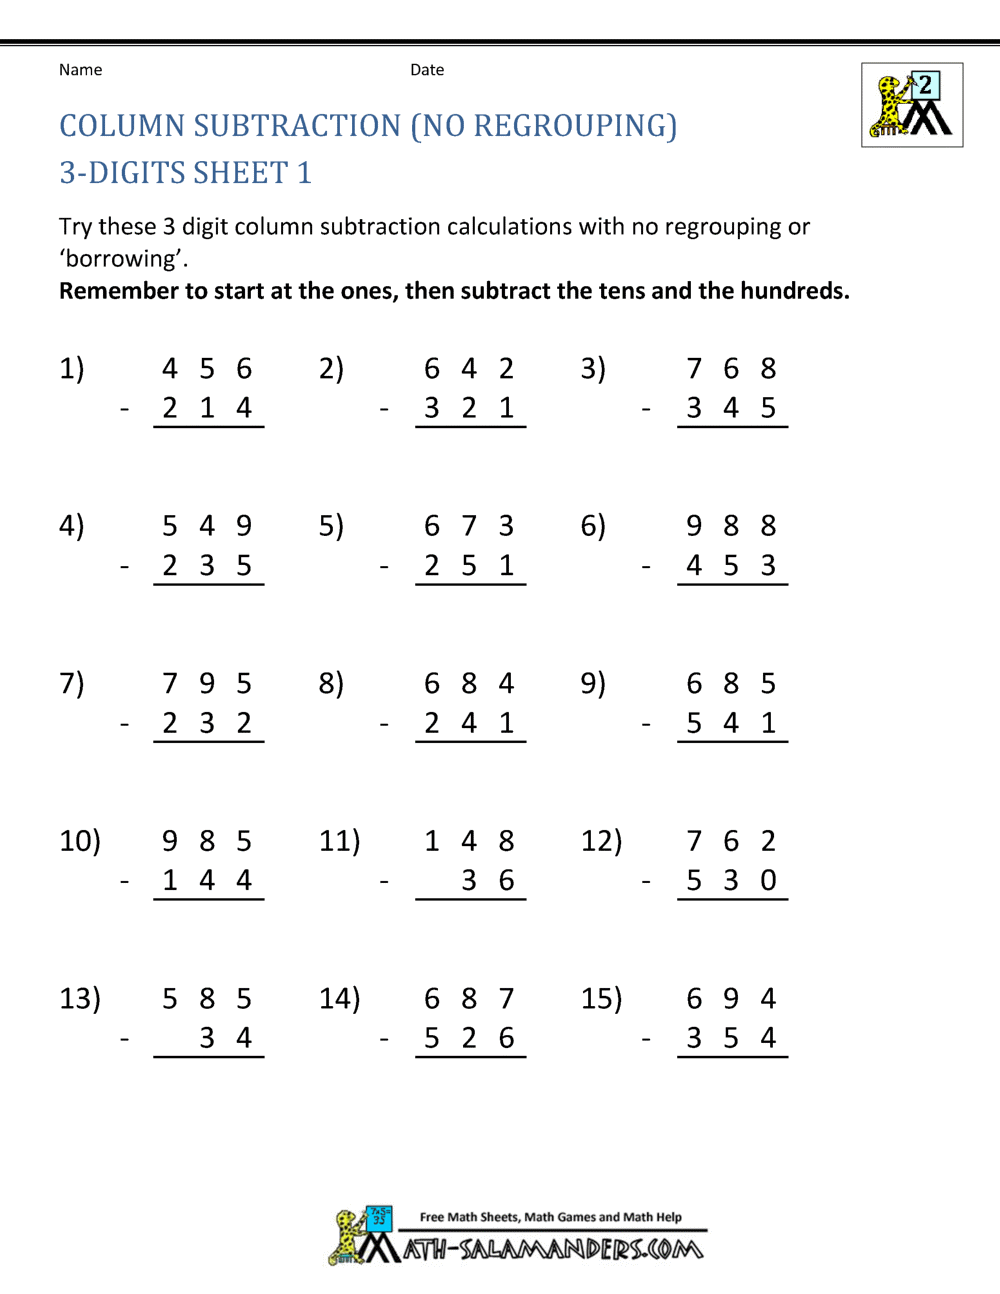 3-digit-subtraction-without-regrouping-worksheets-worksheetscity